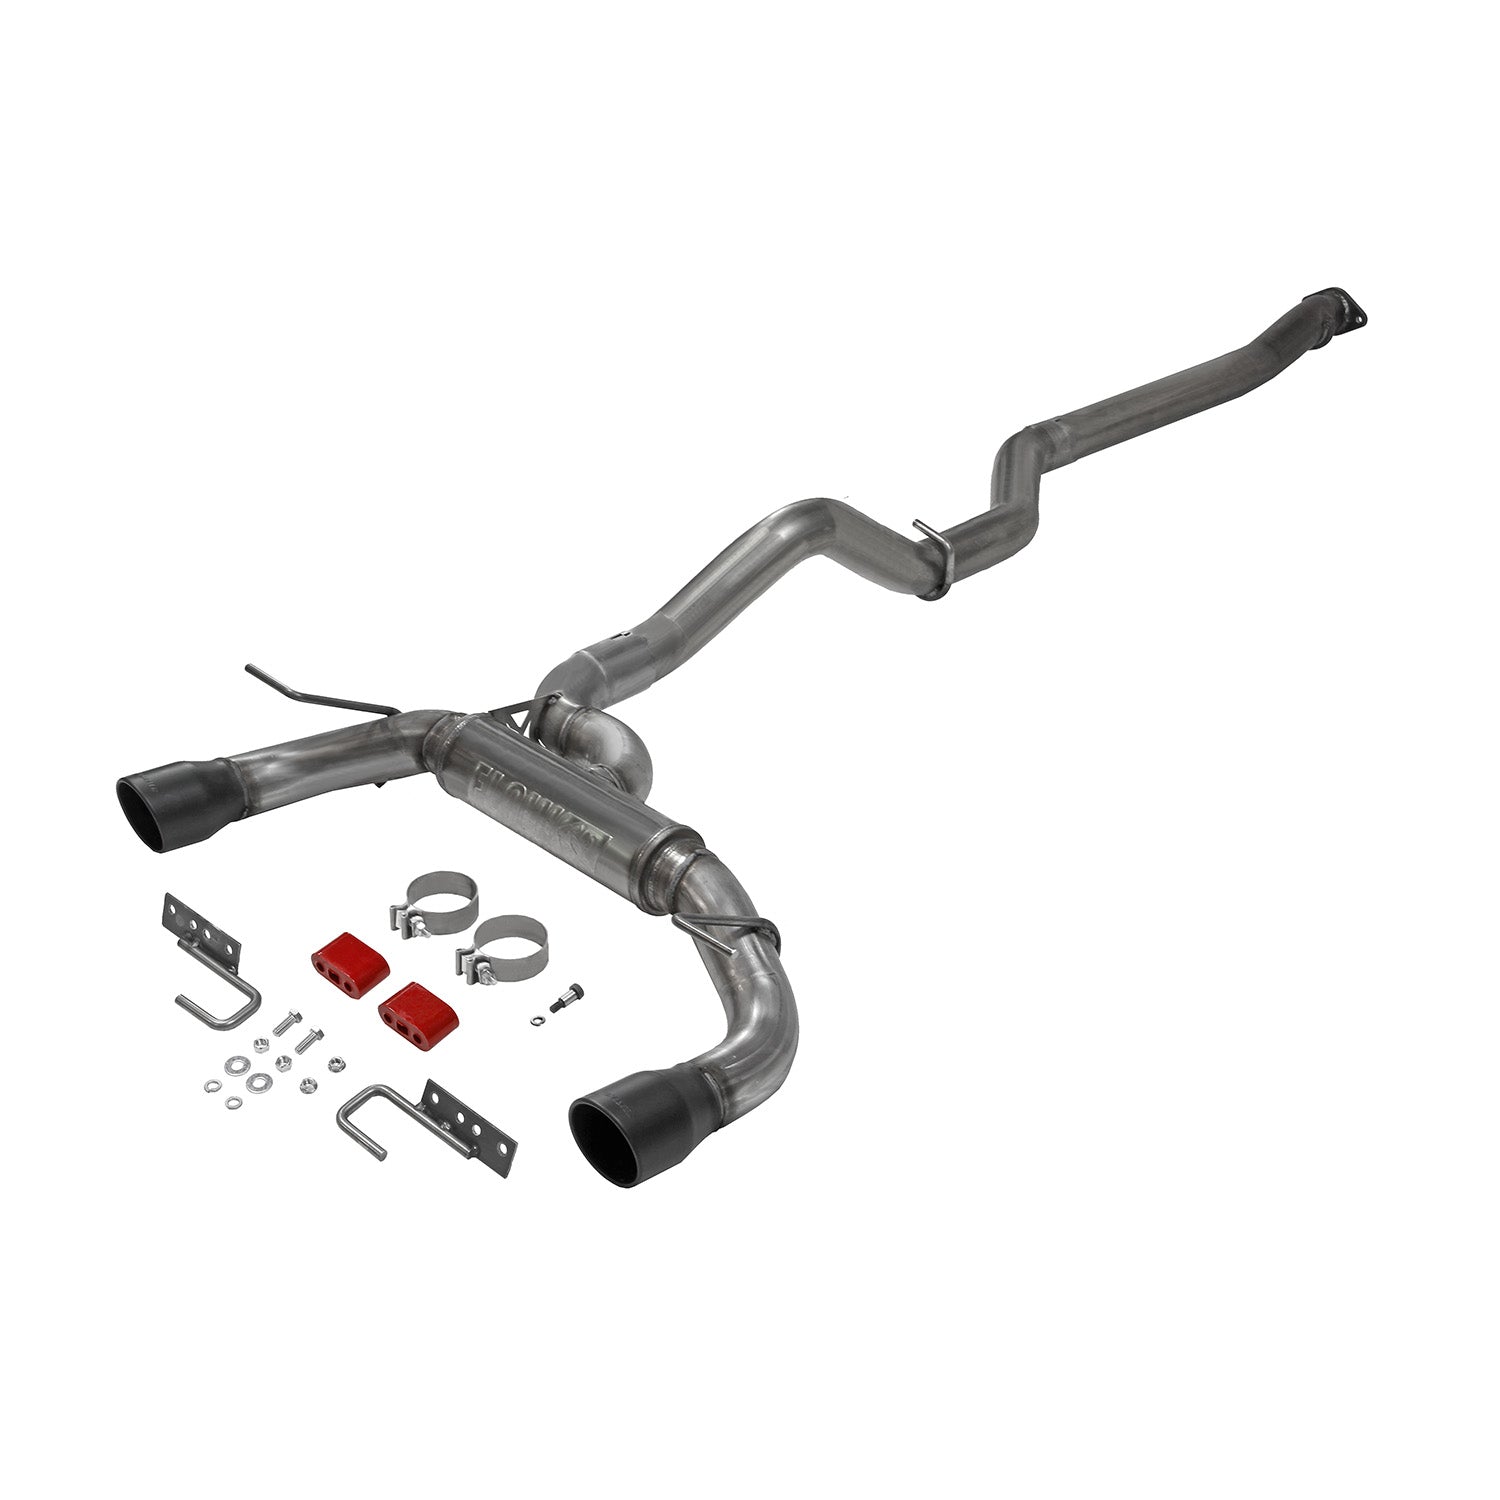 '21-23 Ford Bronco FlowFX Cat-Back Dual Exit Exhaust System Flowmaster parts